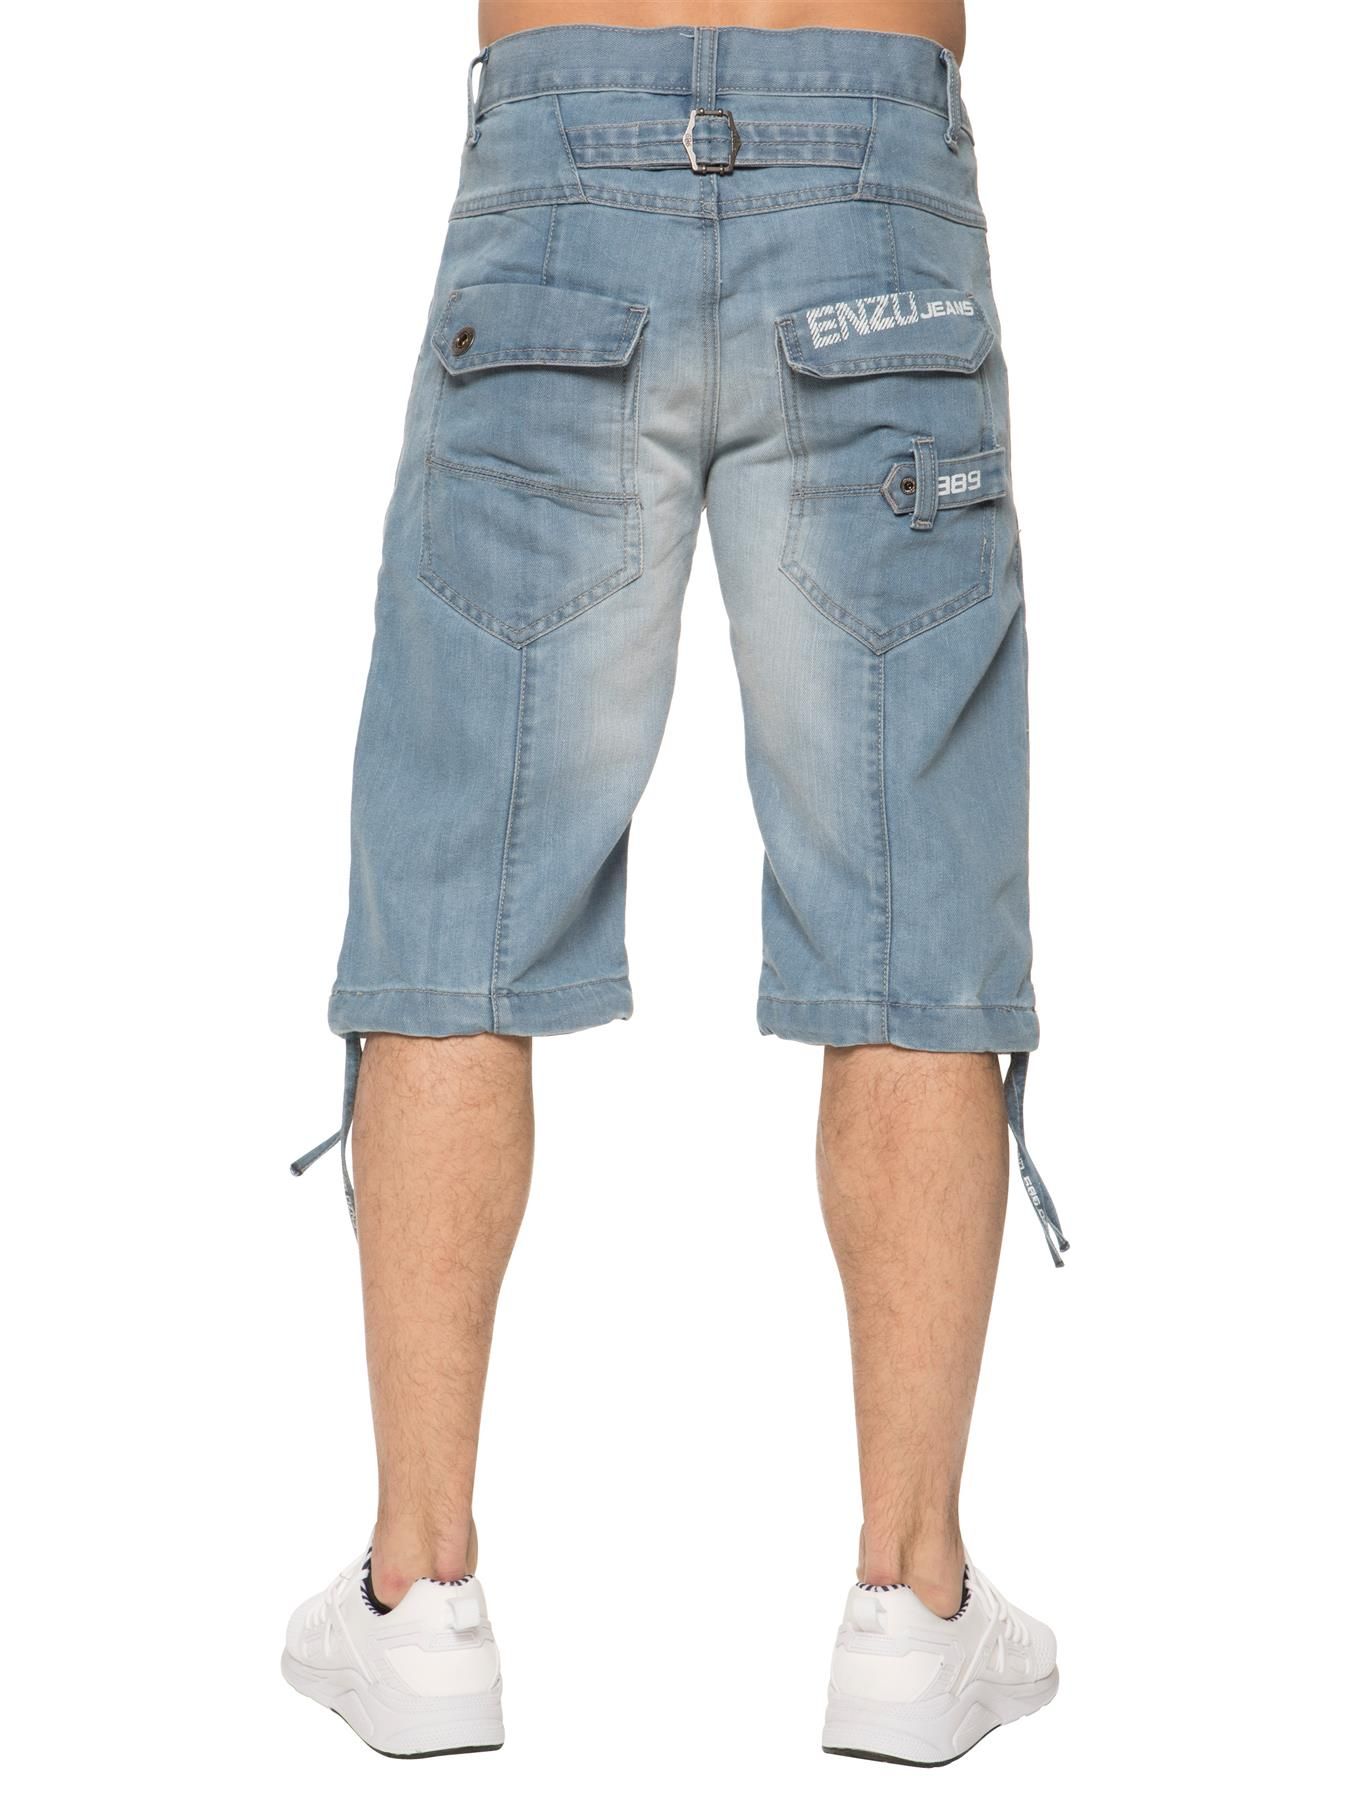 Enzo Mens Designer Knee Length Denim Shorts In Sky Blue, 2 Front Pockets, 2 Back Pockets, Button fly fastening, 65% Cotton, 35% Polyester, Machine washable, Ideal for Casual Occasions.